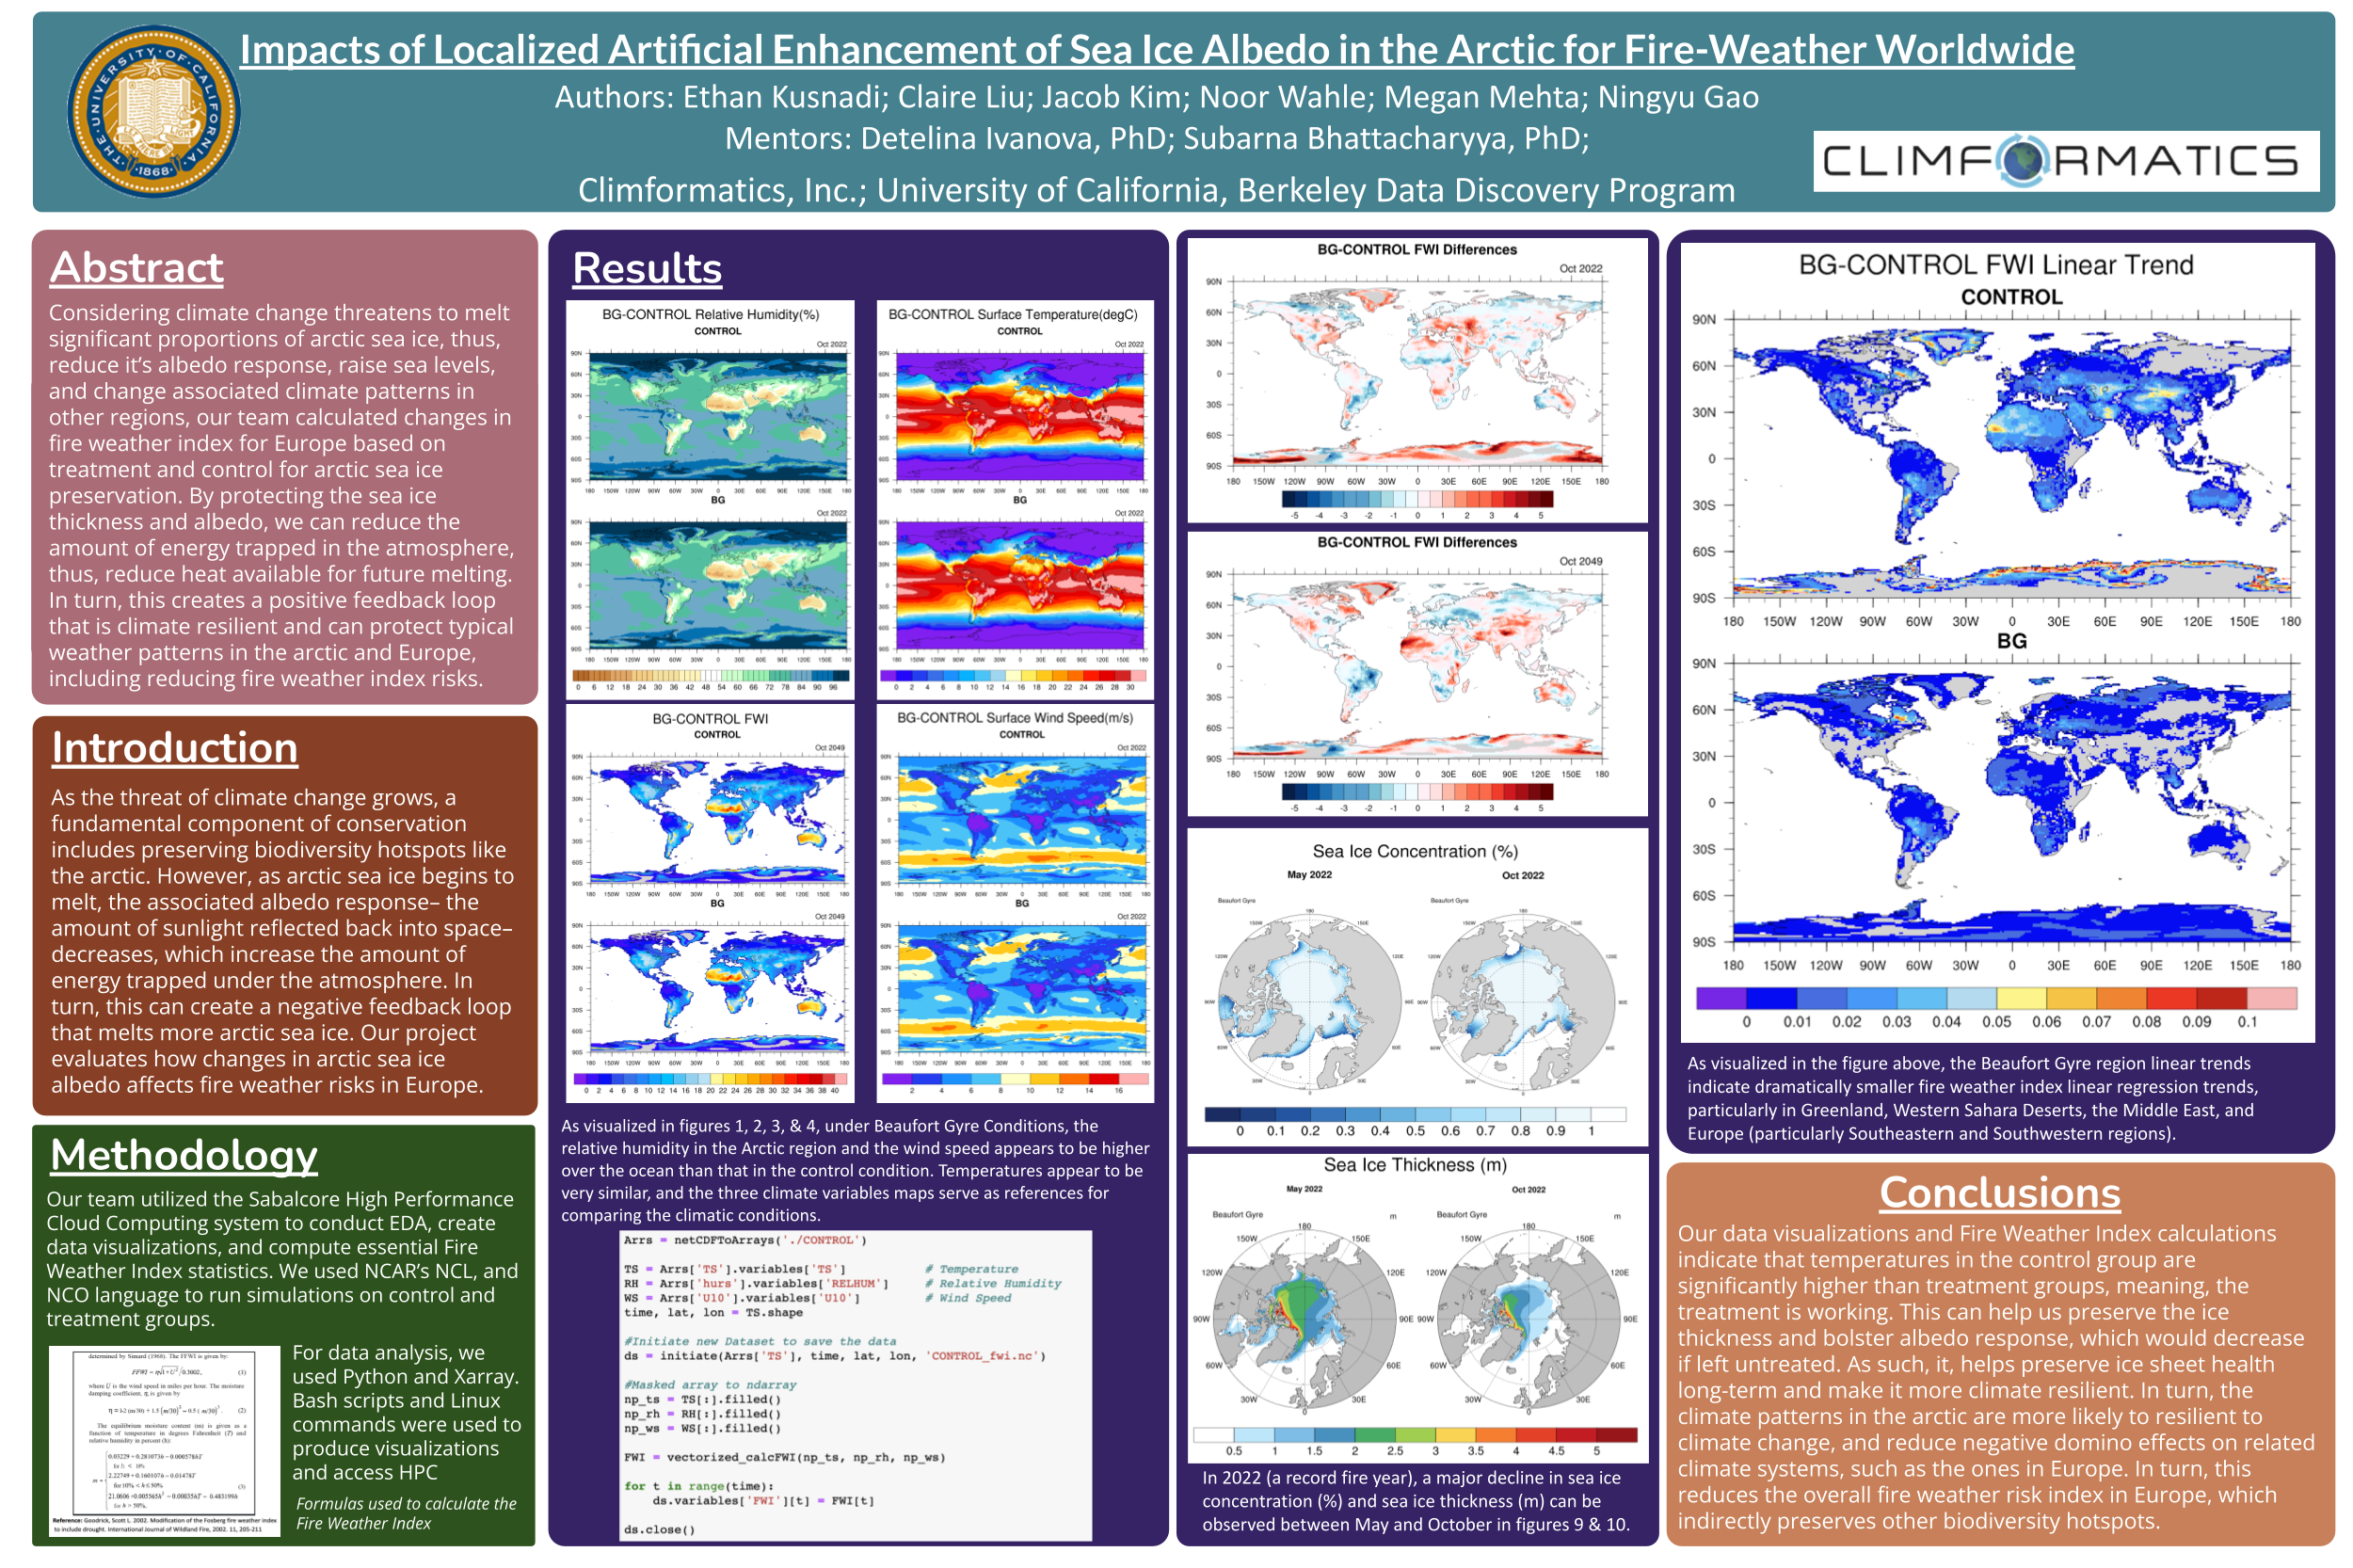 mpacts of Localized Artificial Enhancement of Sea Ice Albedo in the Arctic for Fire-Weather Worldwide - Spring 2023 Discovery Project